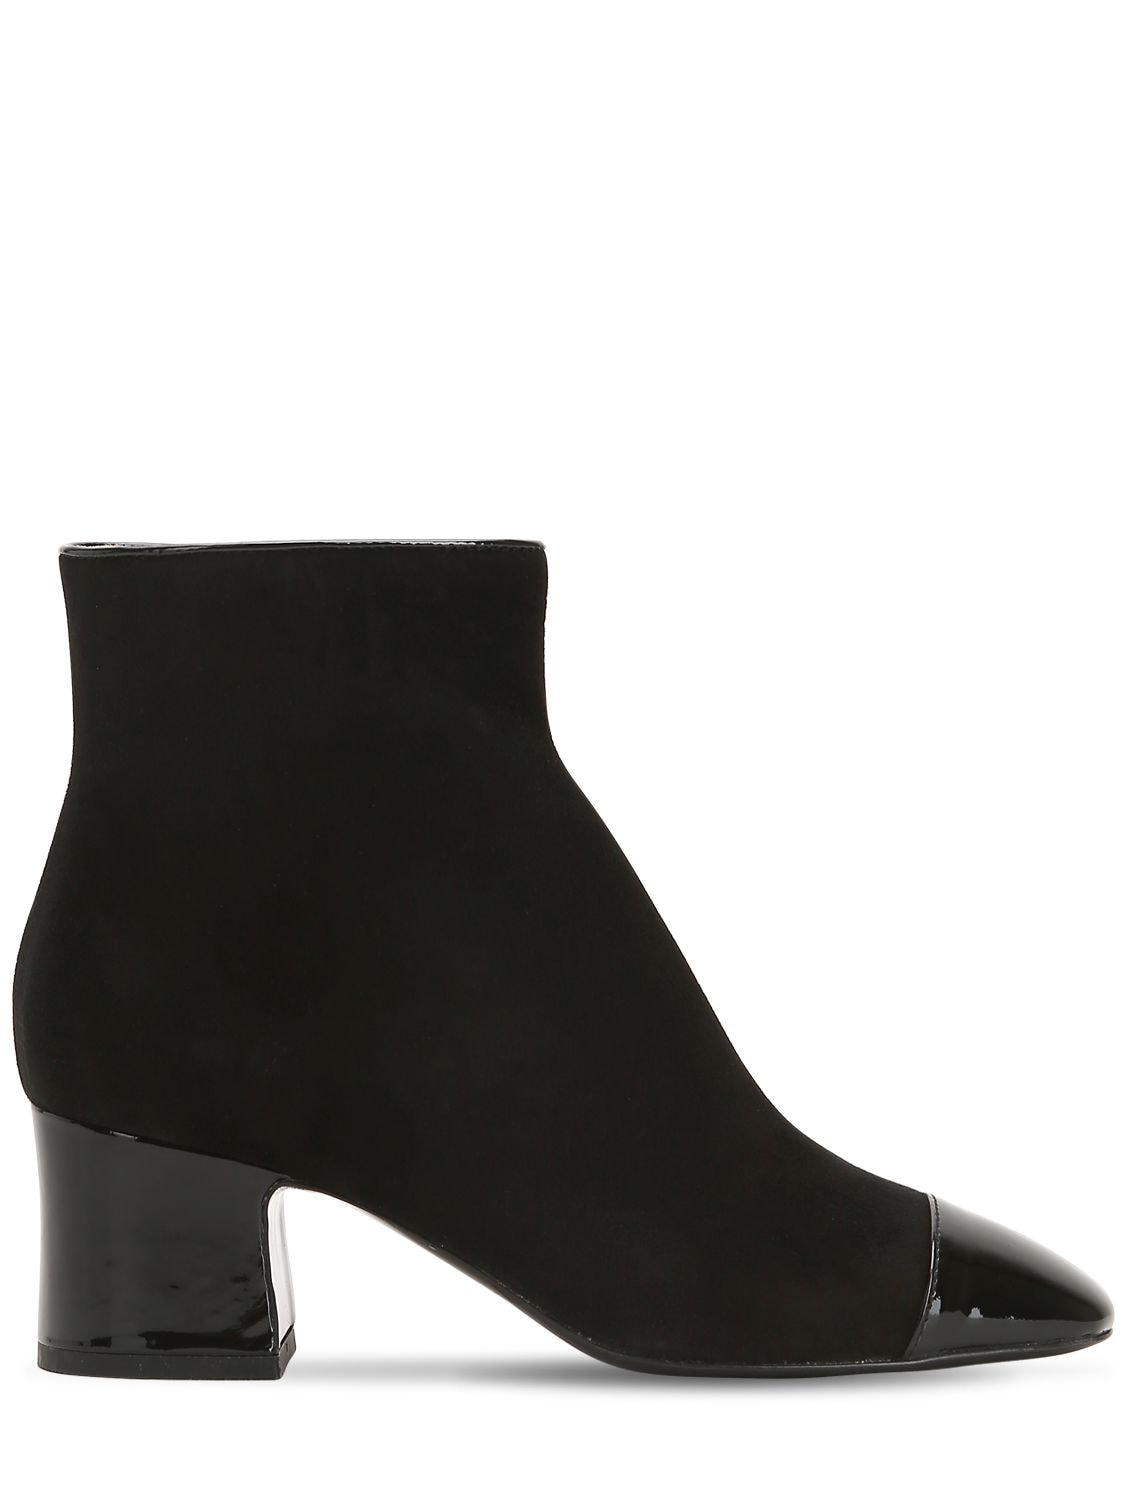 Aand 60mm Suede & Patent Leather Ankle Boots In Black